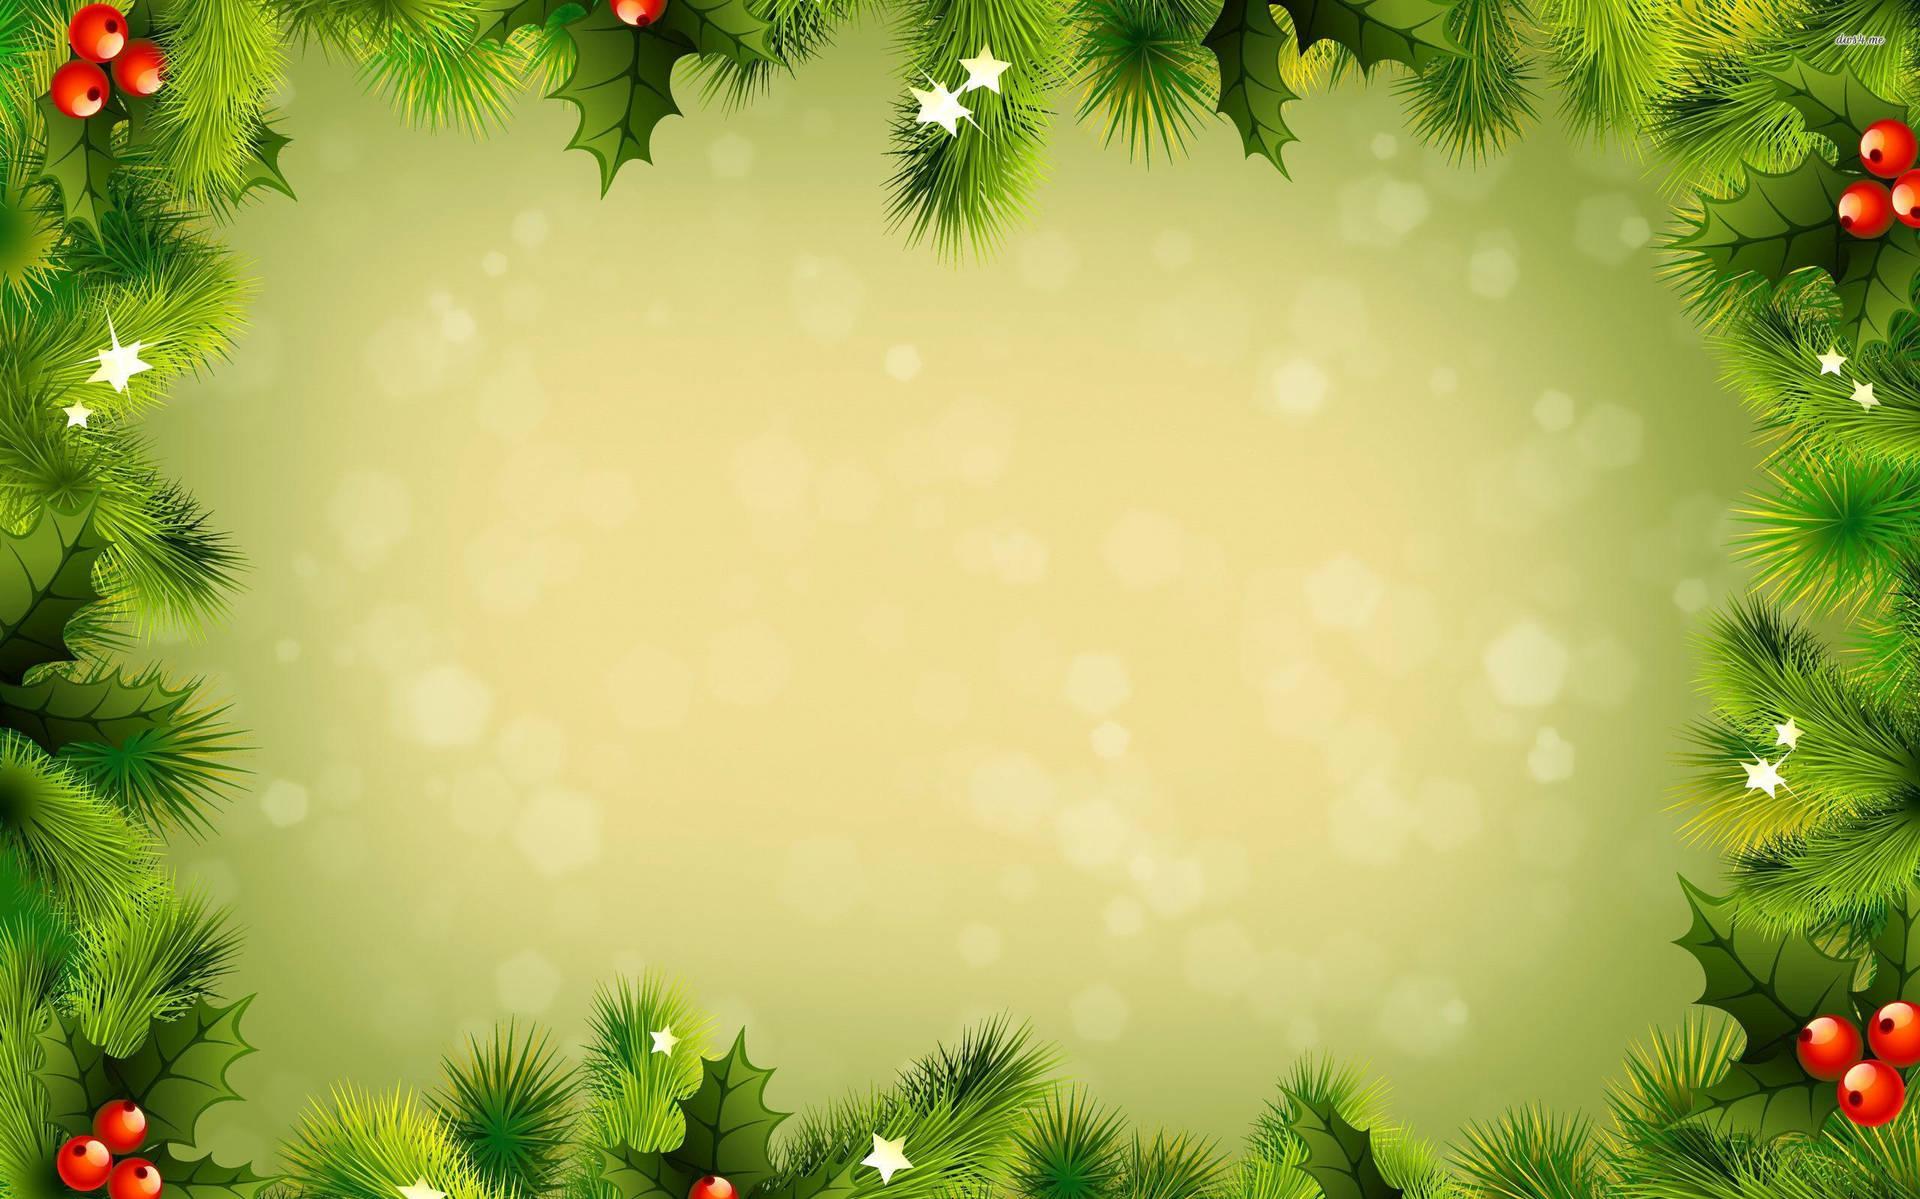 Download Green Christmas Background Wallpaper